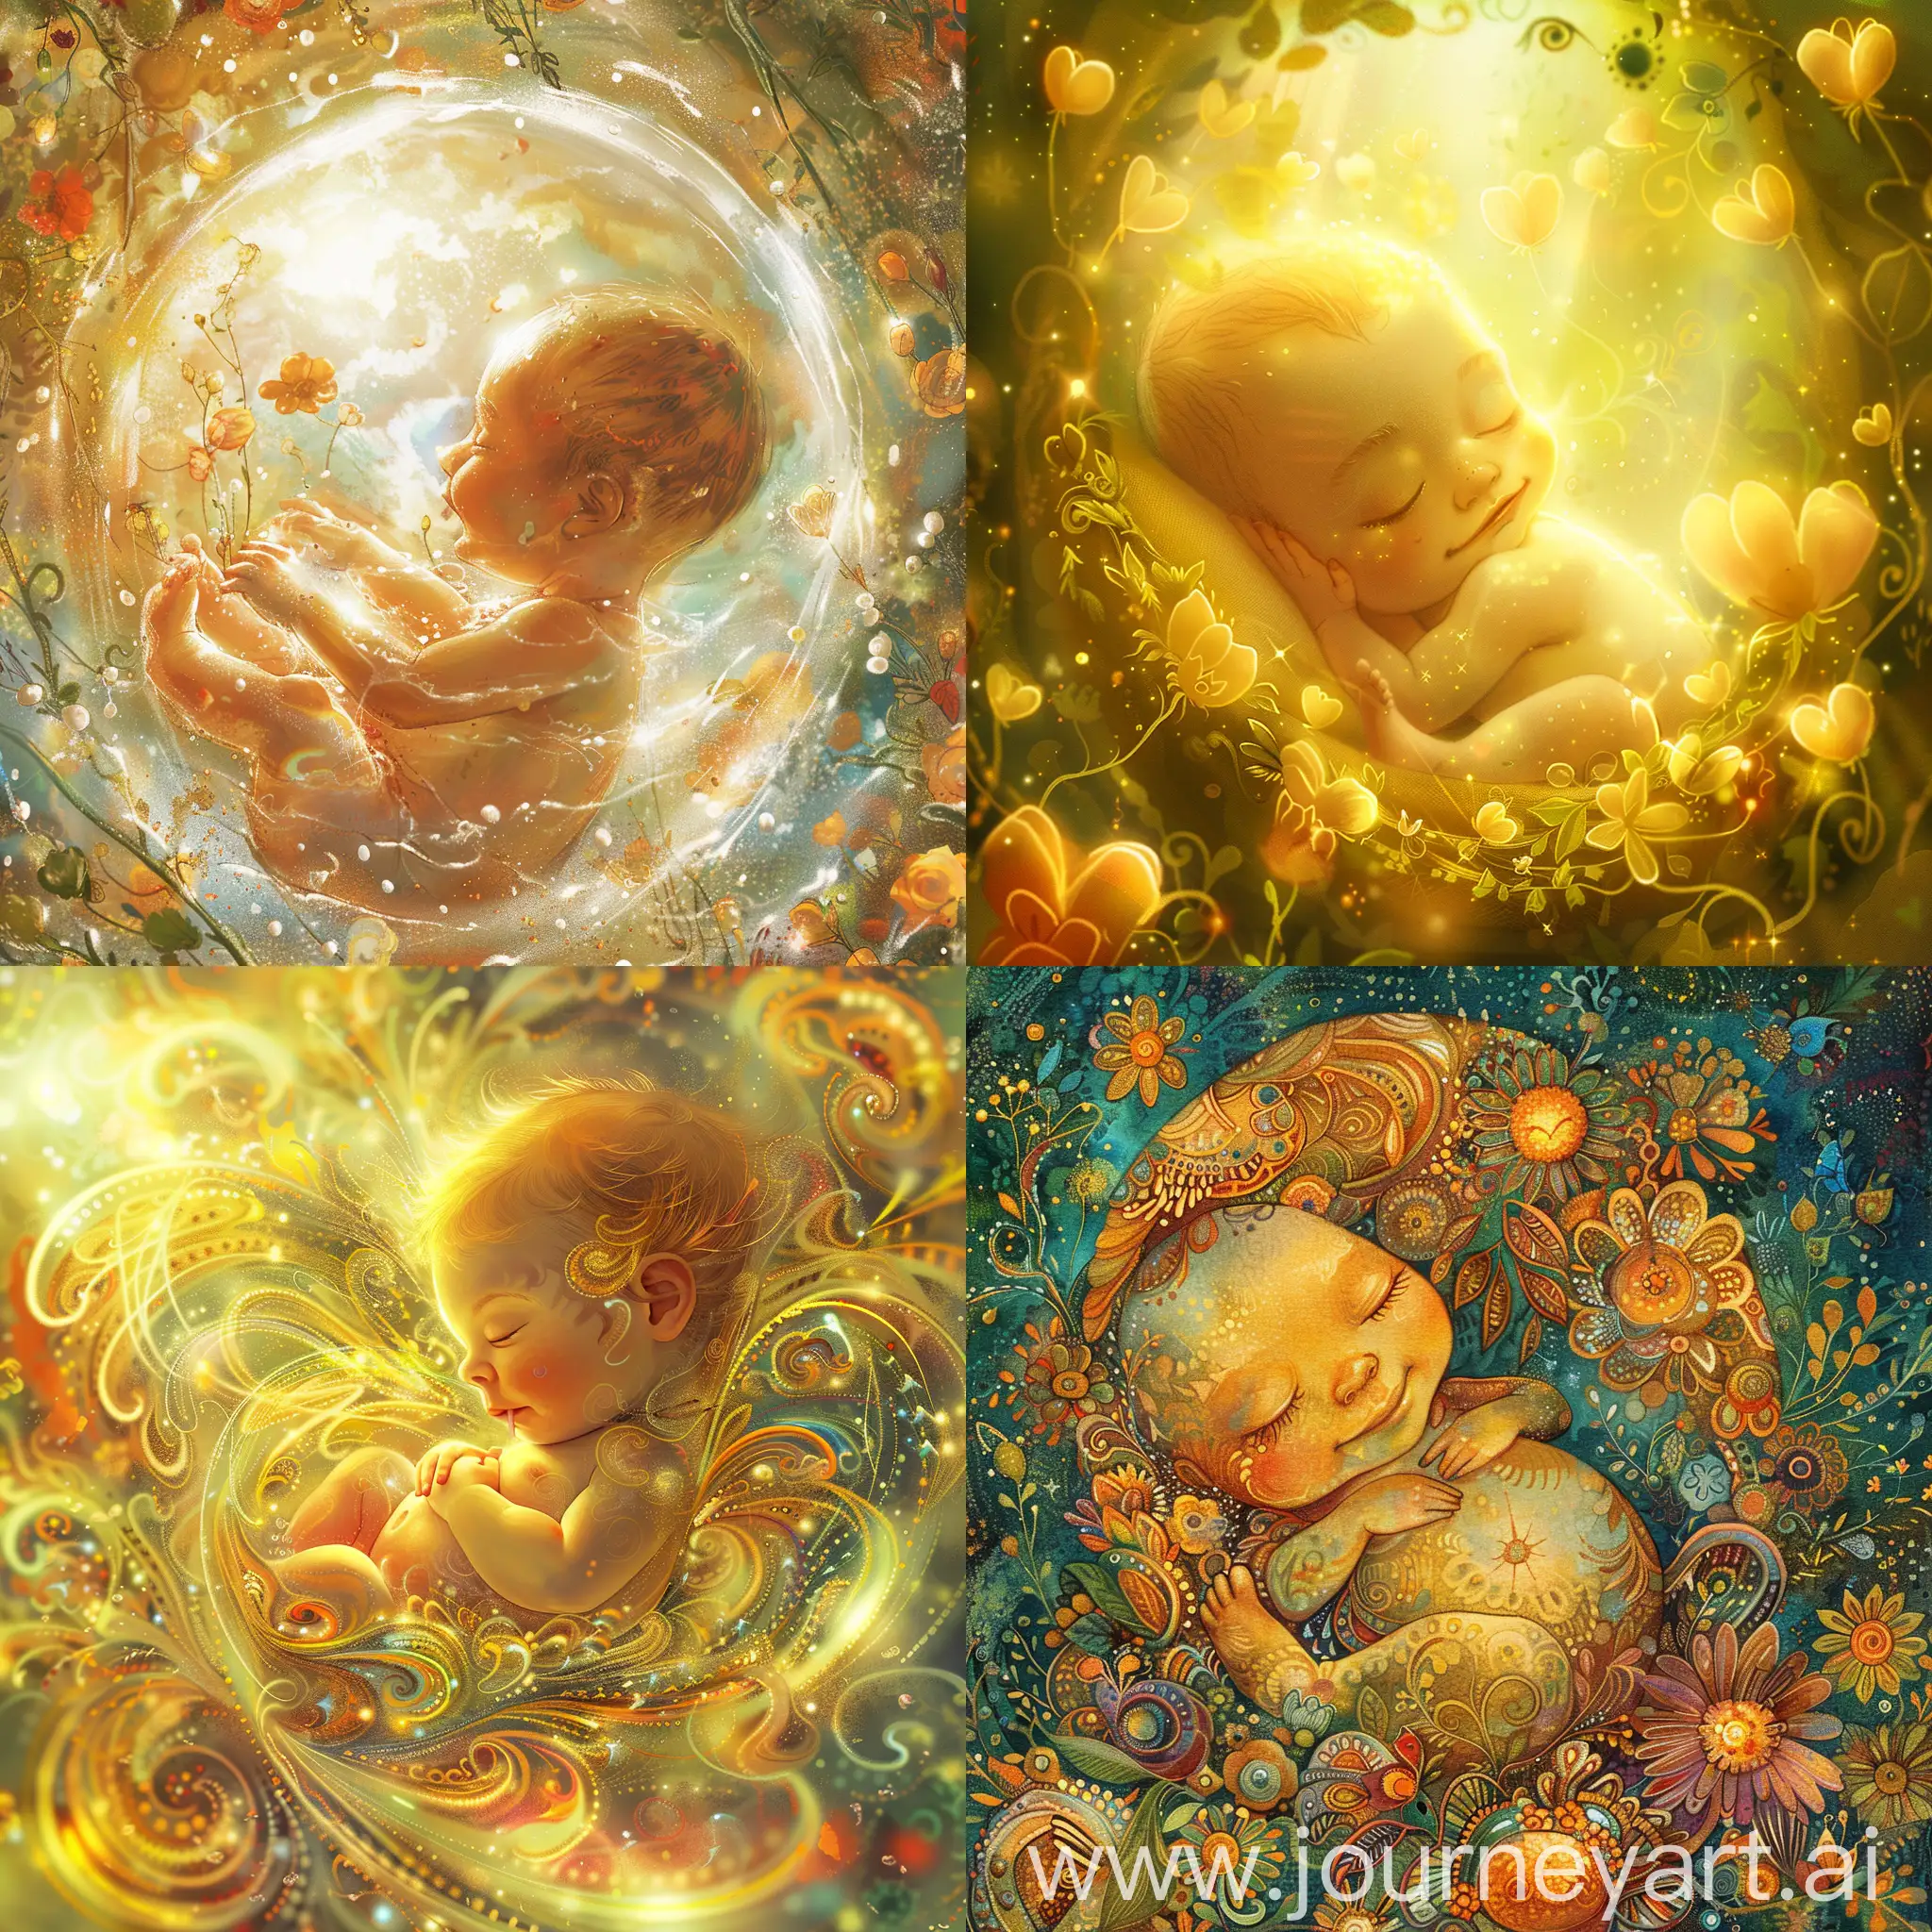 Joyful-Fetus-Surrounded-by-Love-and-Blessings